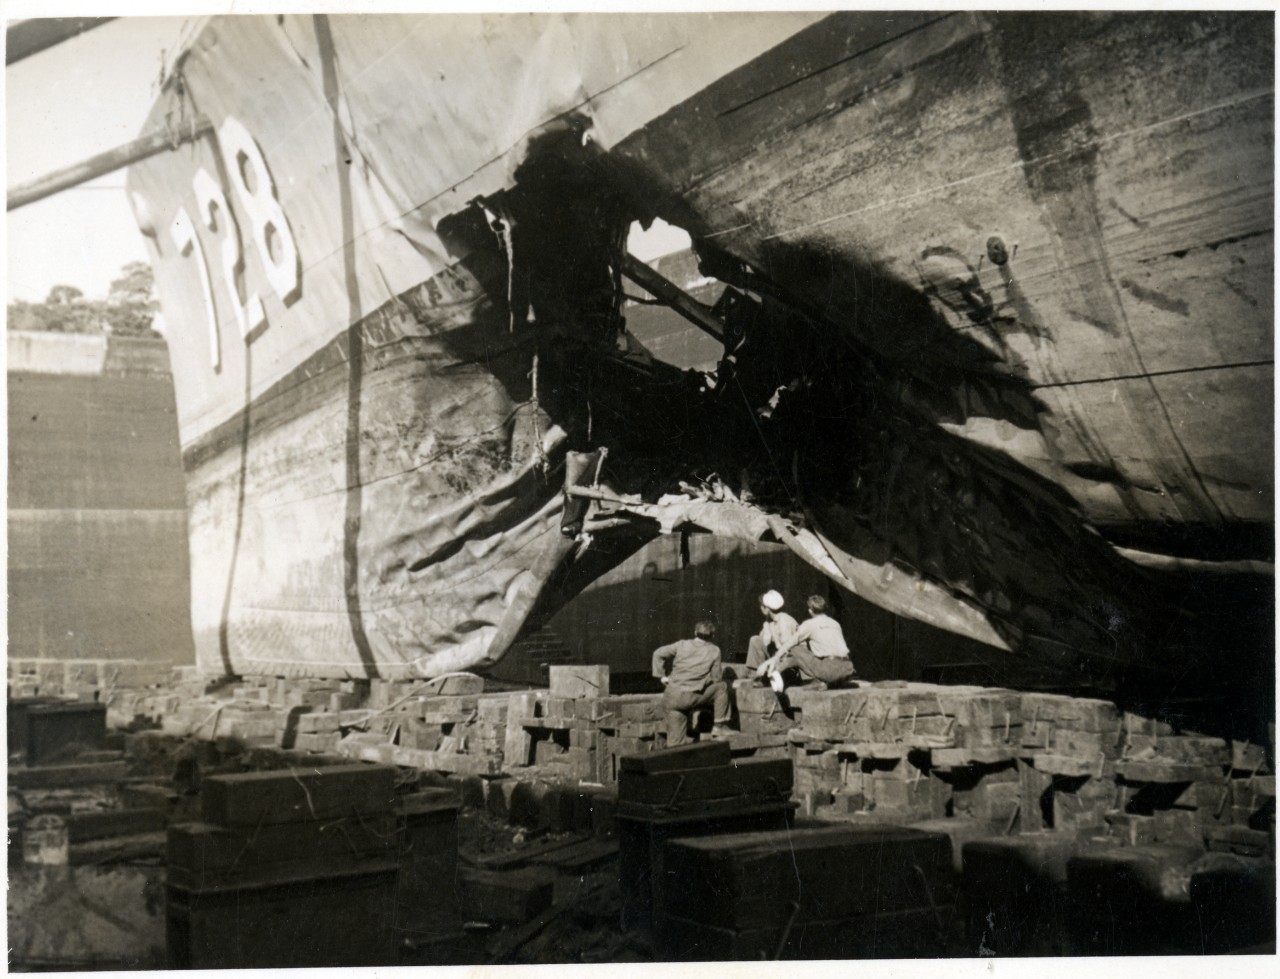 Damage inflicted upon USS Mansfield (DD-728) by a mine off the coast of Korea in 1950. (UA 452.02)